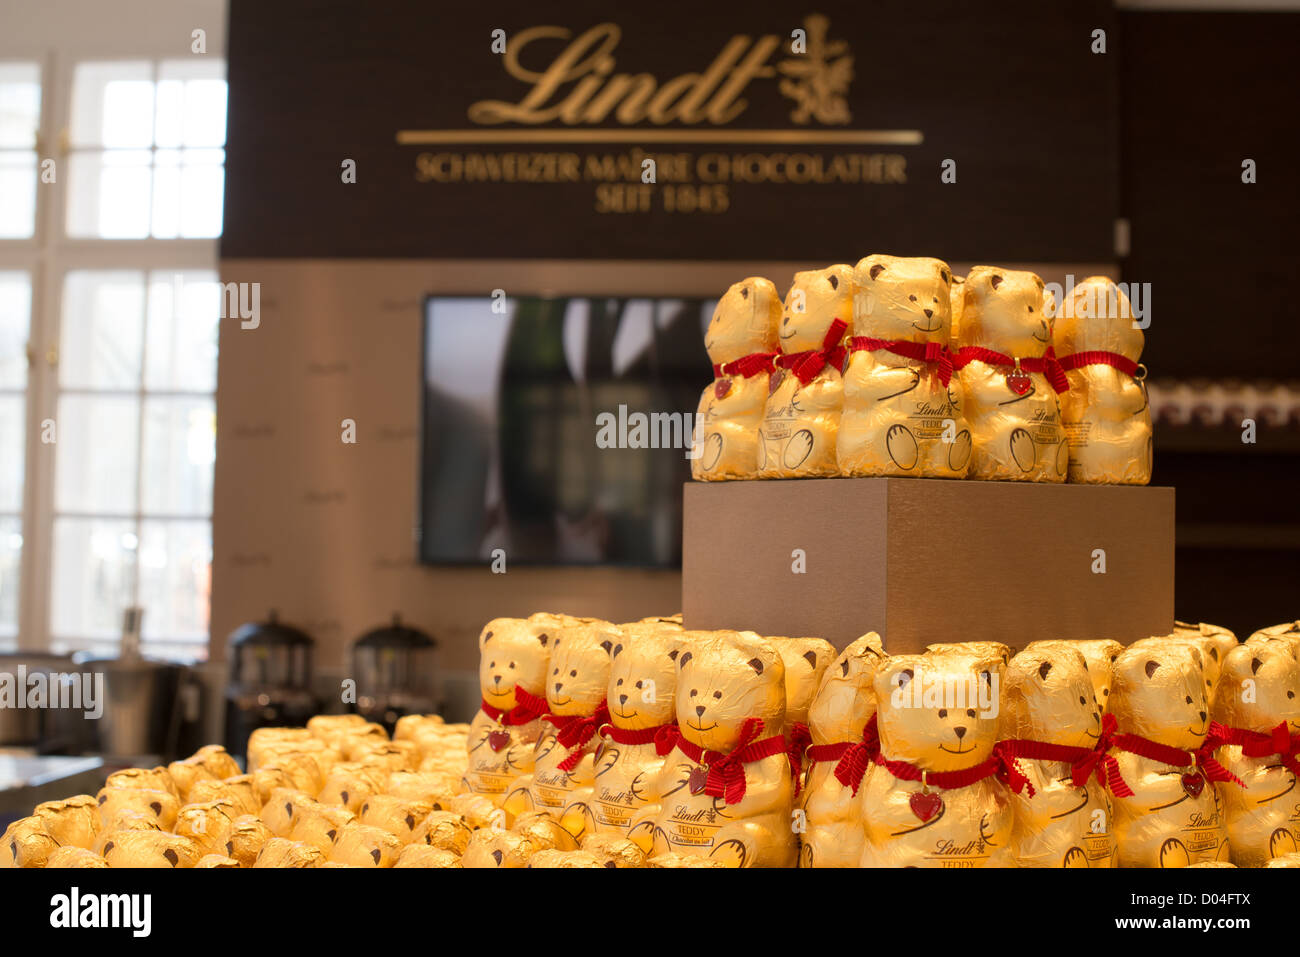 The newly opened Lindt Chocolate Boutique at the famous Schoenbrunn Palace on October 4, 2012 in Vienna, Austria. Stock Photo